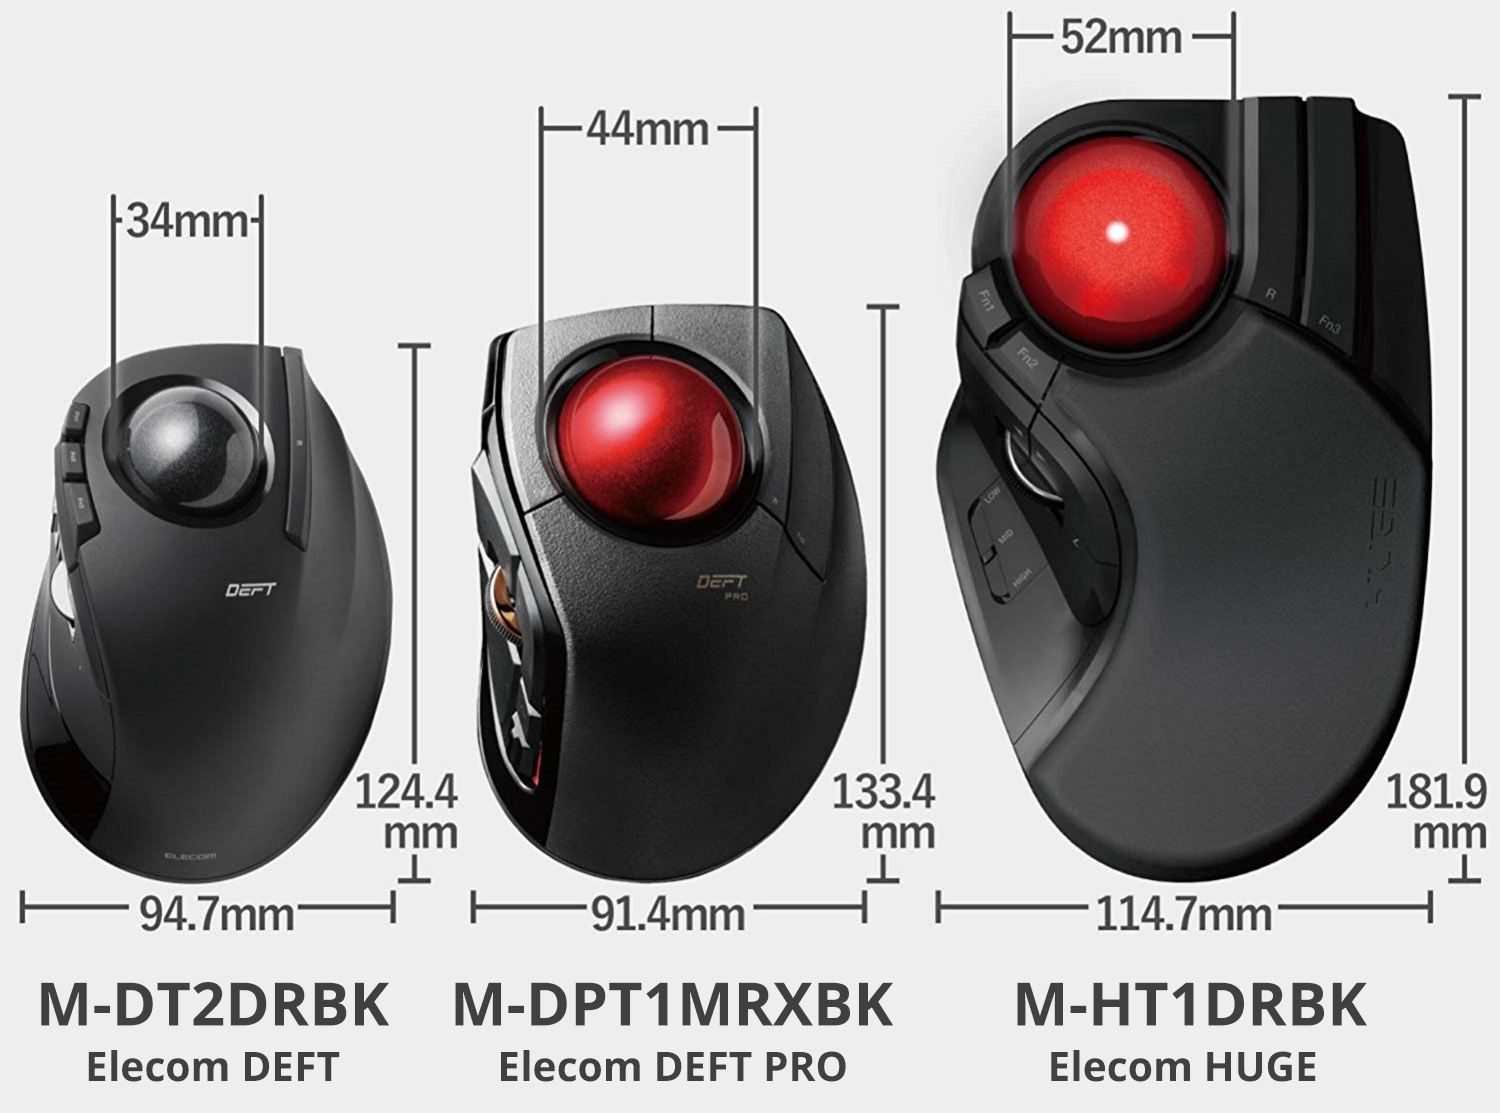  Buy ELECOM M-HT1DRBK Wireless Trackball Mouse - Extra Large  Ergonomic Design, 8-Button Function with Smooth Tracking, Black Online at  Low